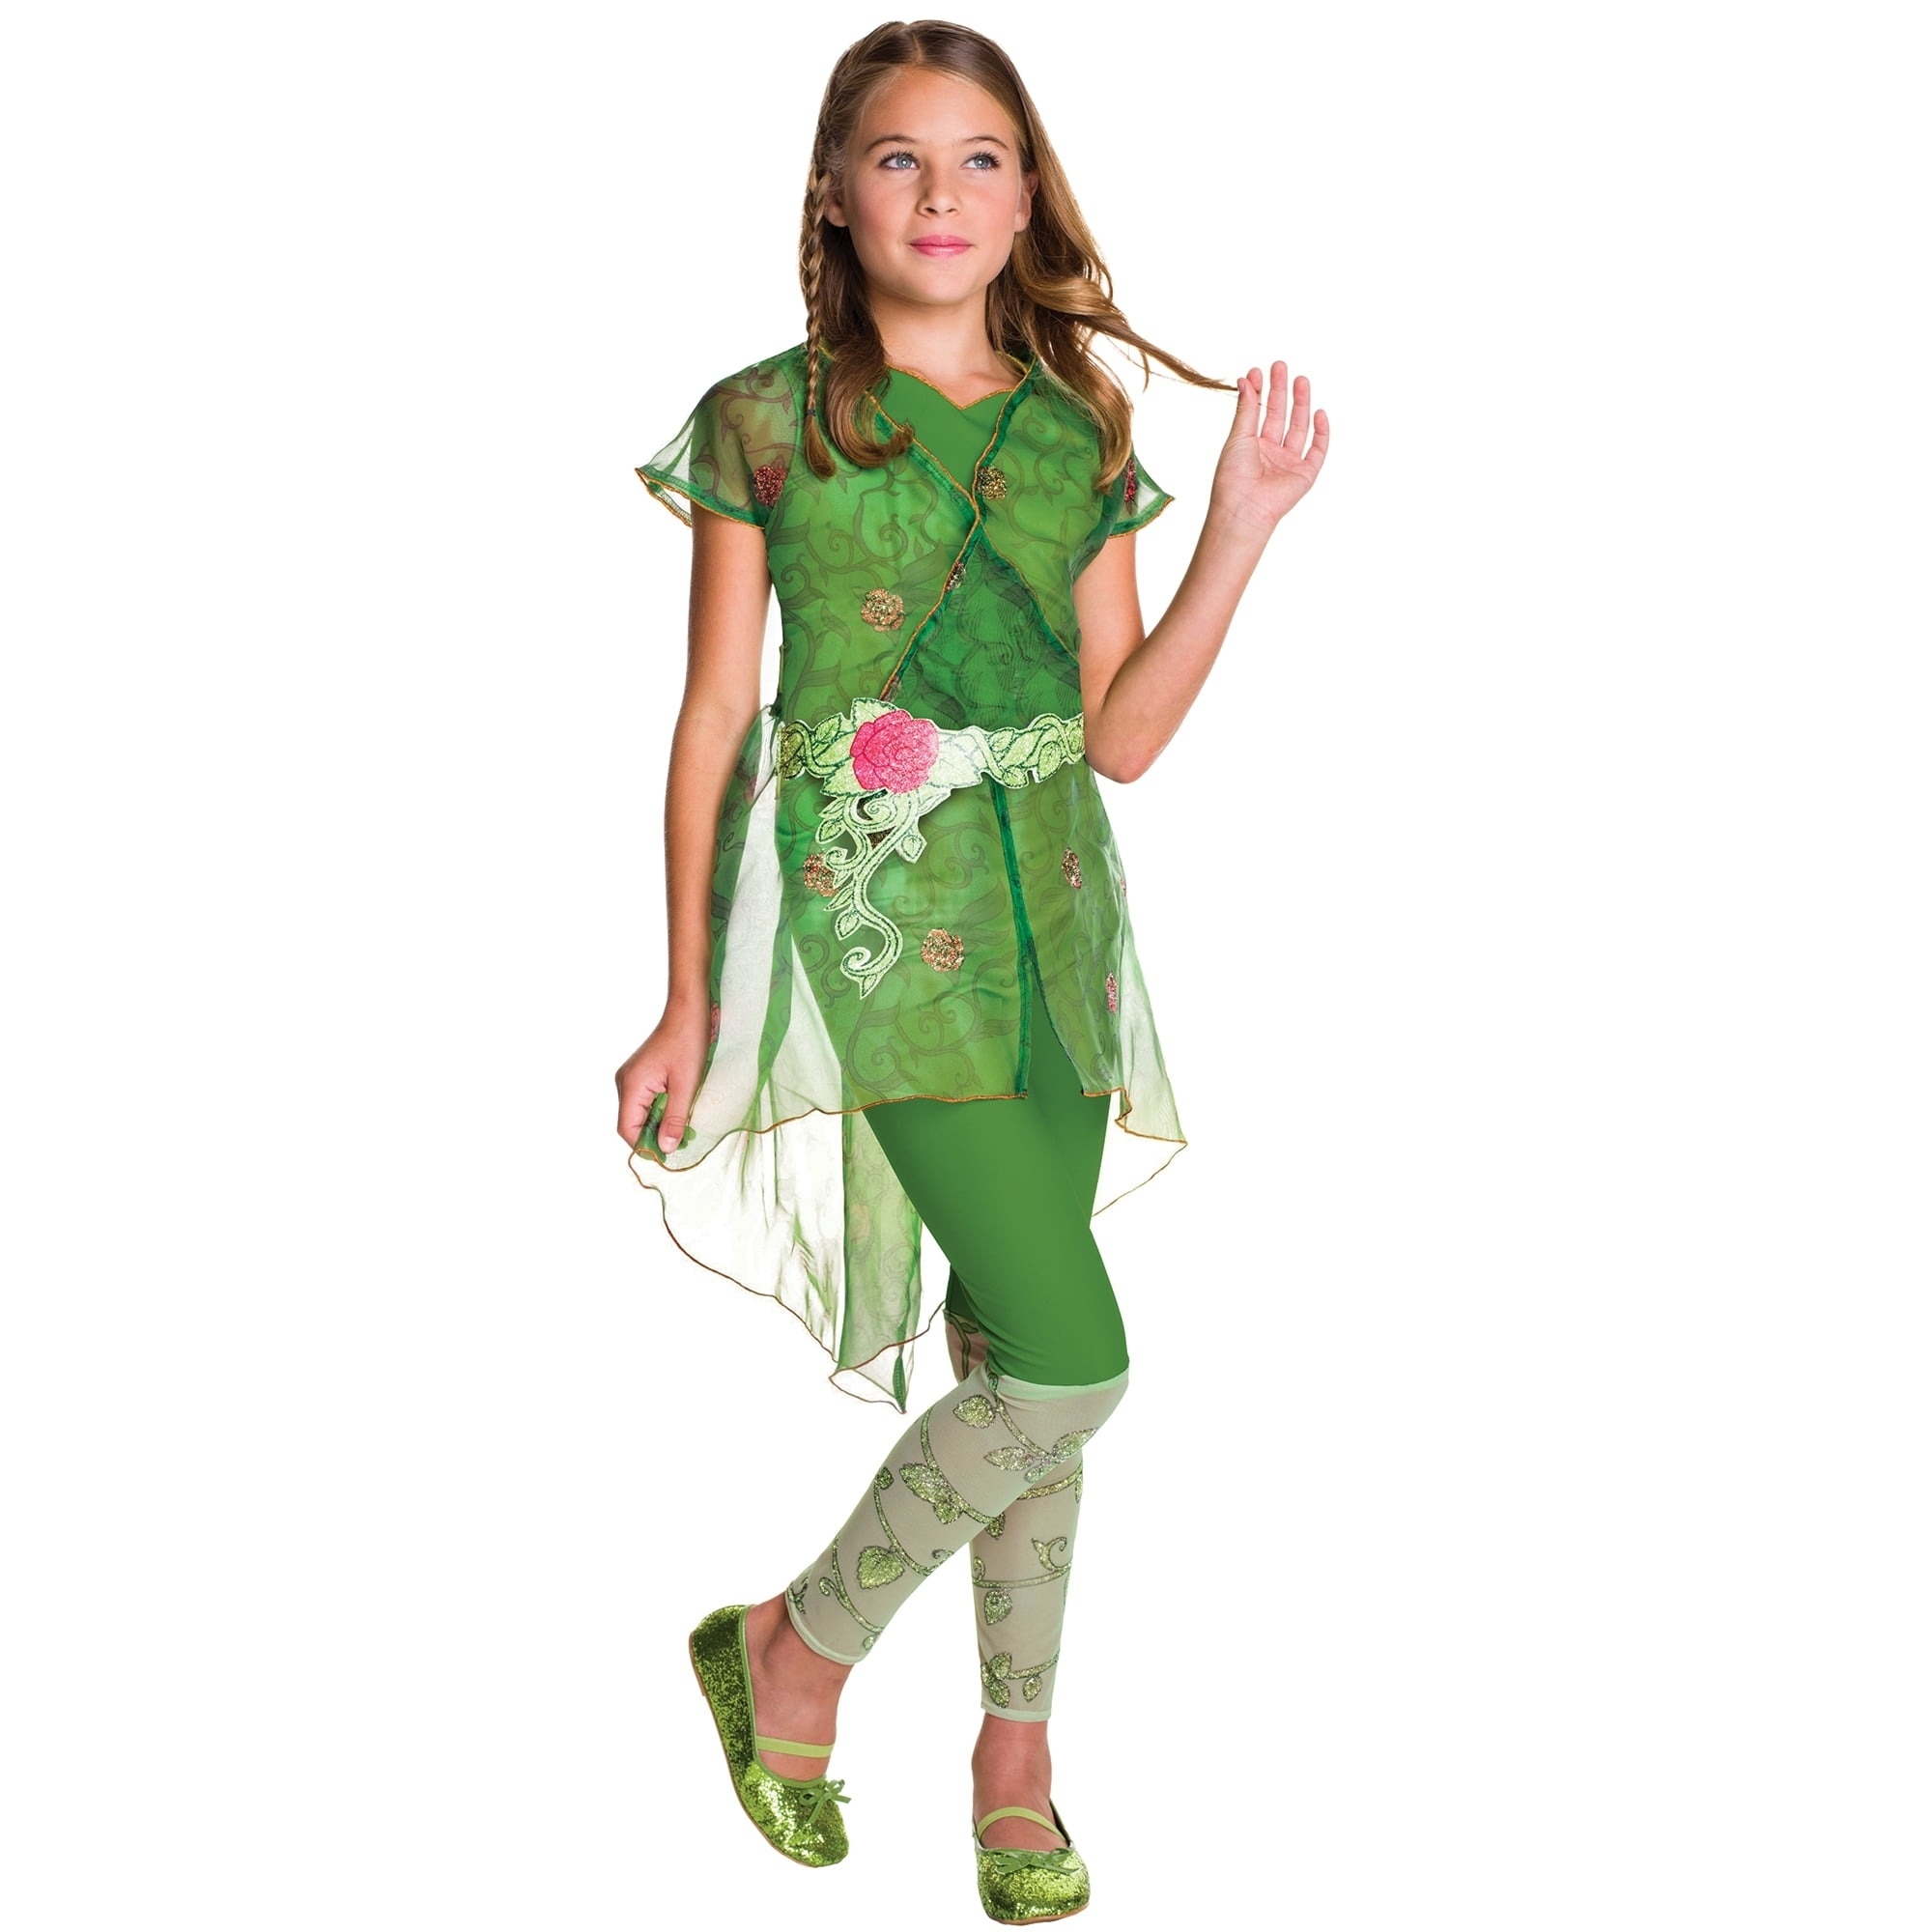 child model in poison ivy costume